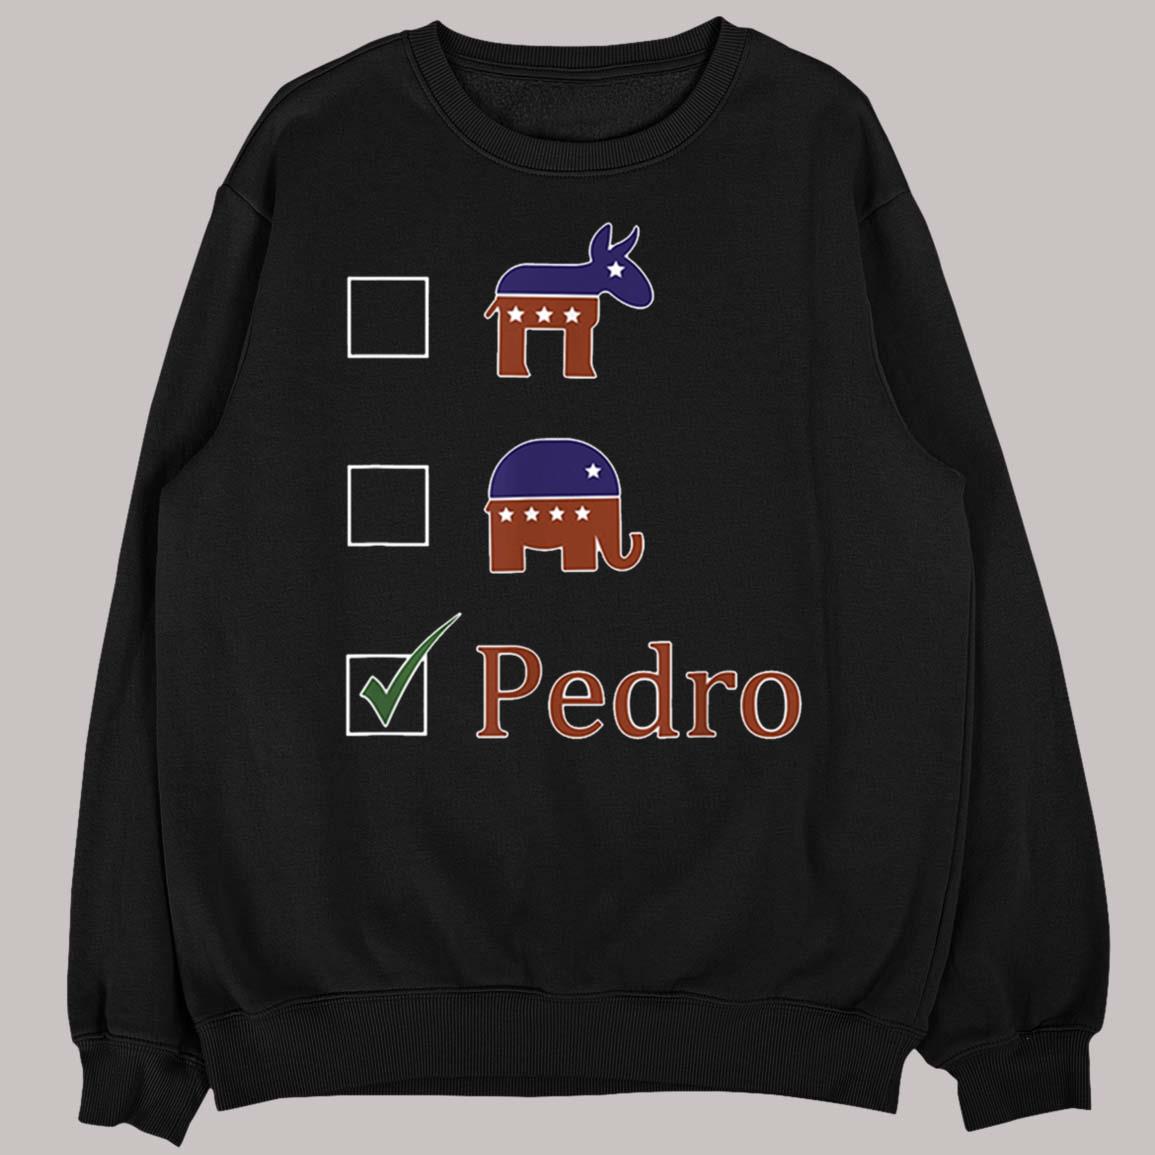 Voted For Pedro T-Shirt Election